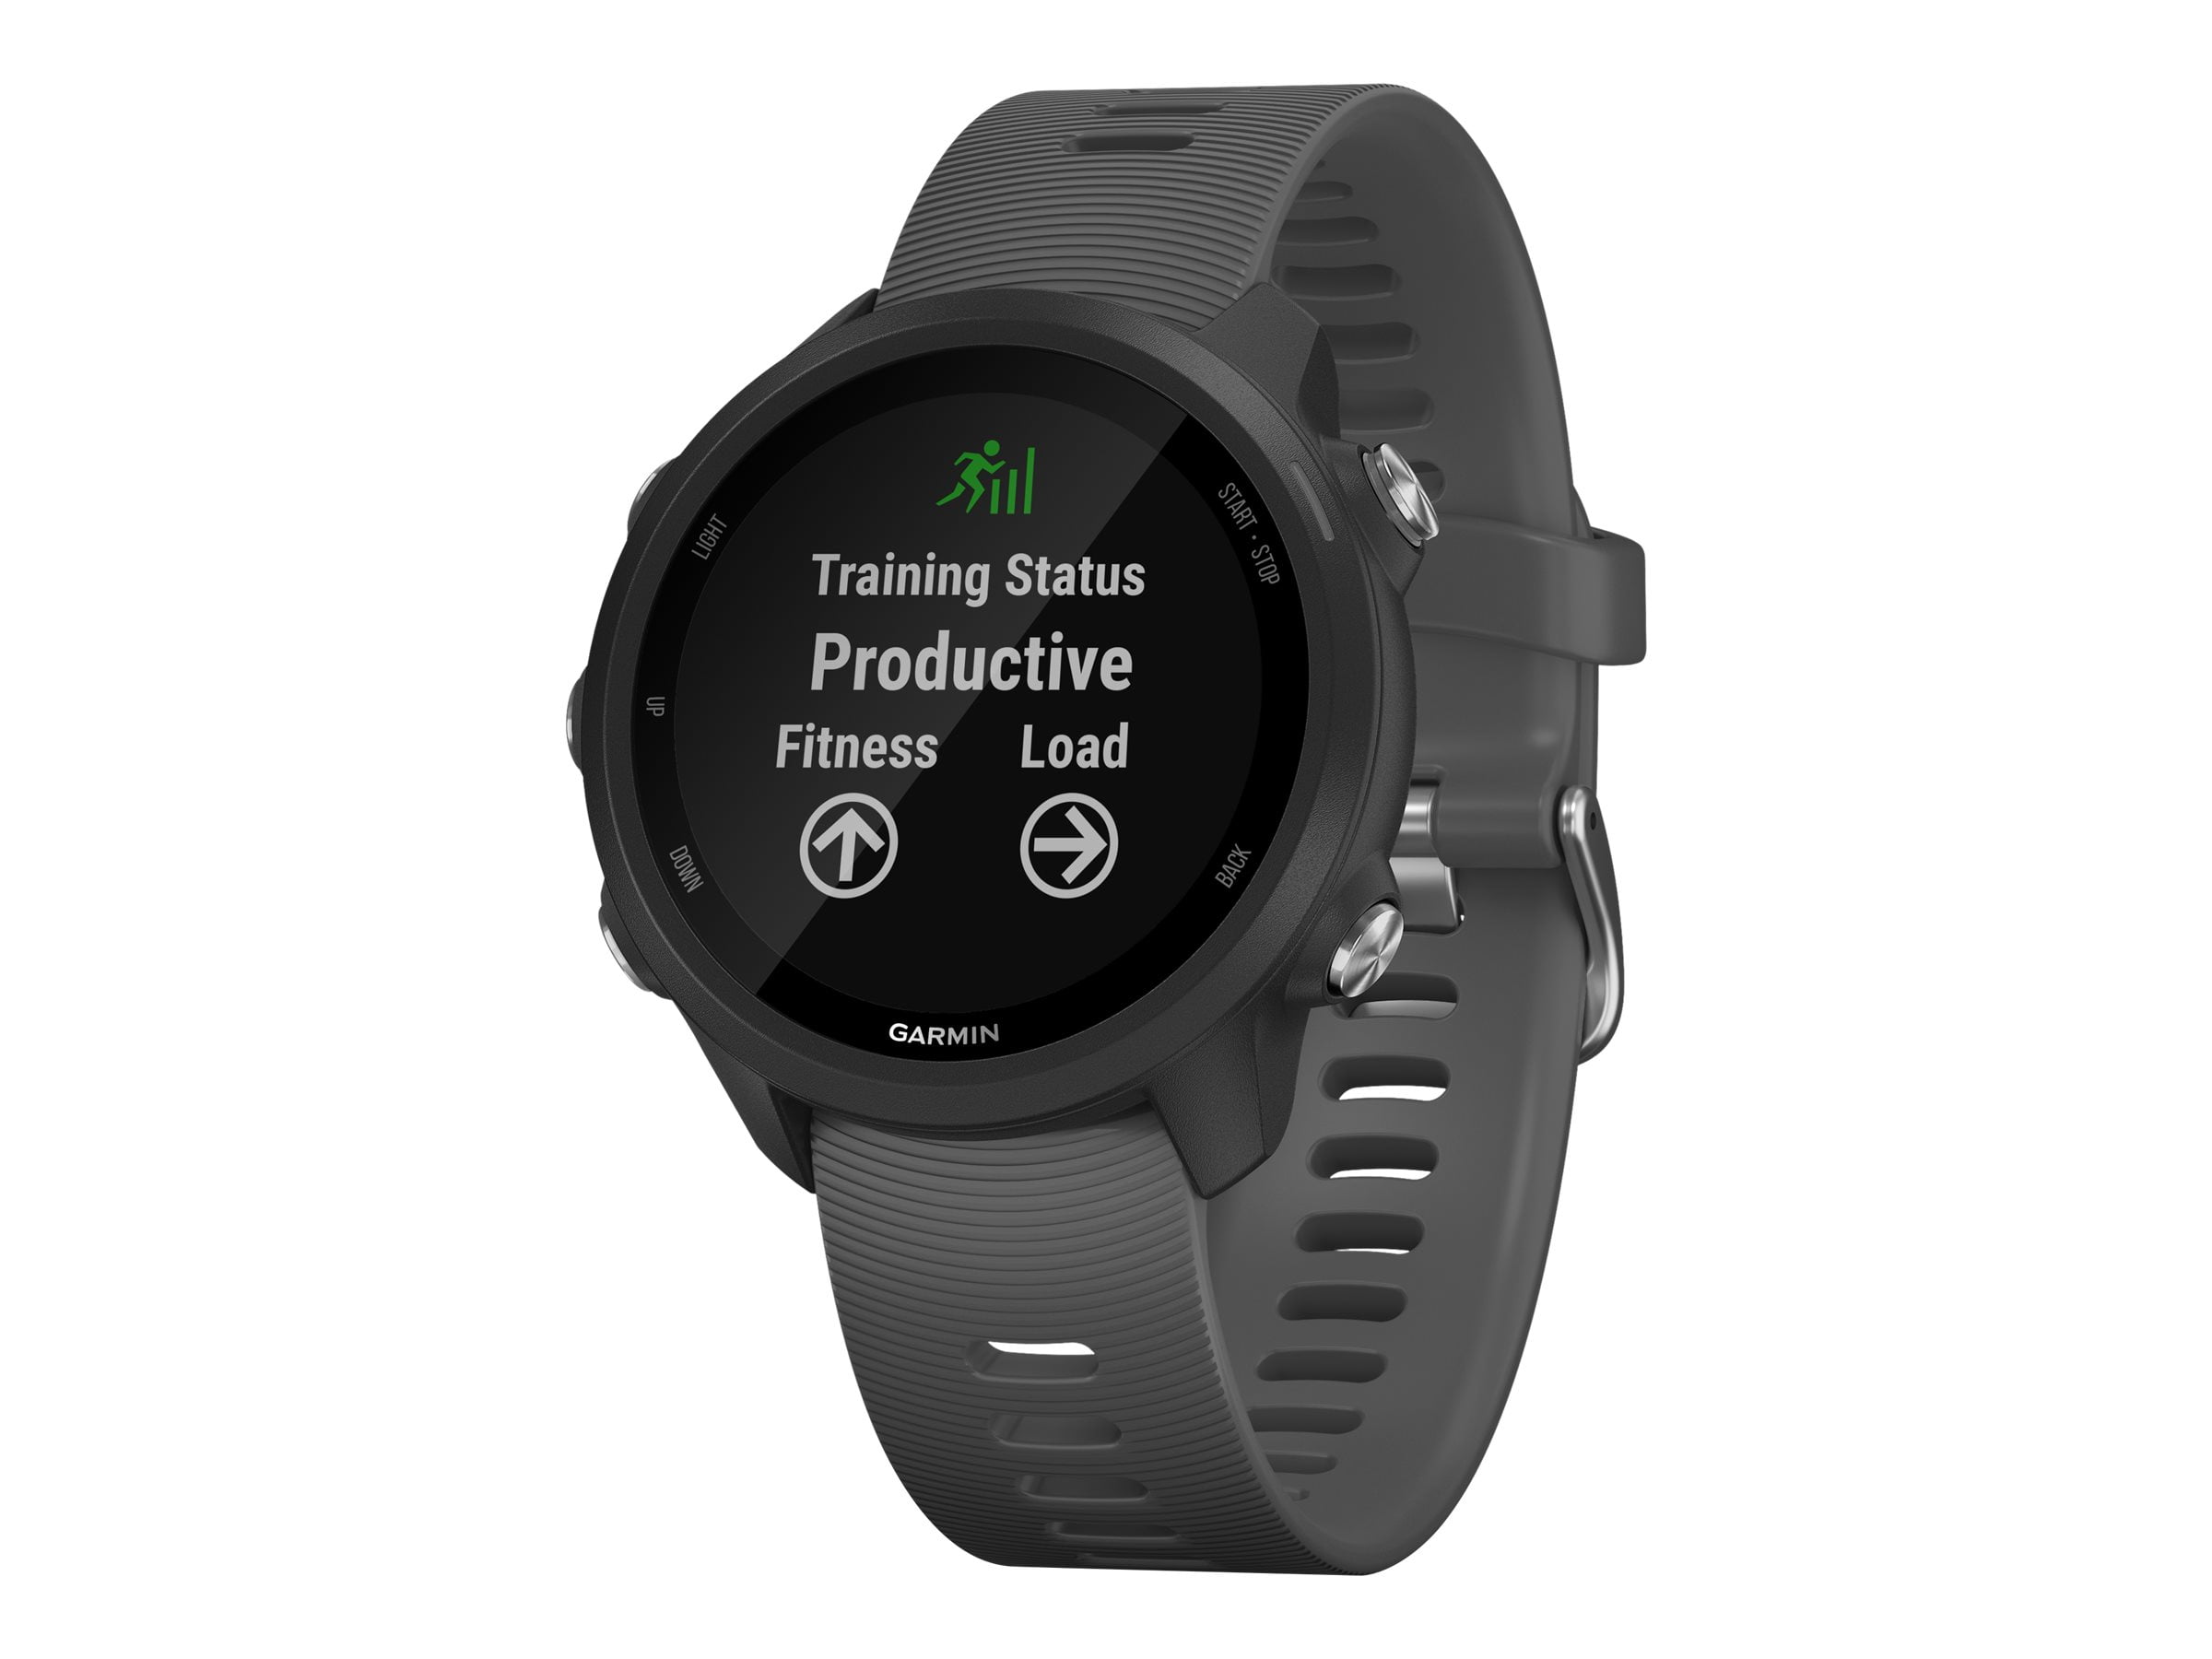 Demon Play kleermaker Briljant Garmin Forerunner 245 - Black - sport watch with band - silicone - slate  gray - wrist size: 5 in - 8.03 in - display 1.2" - Bluetooth, ANT+ - 1.36  oz - Walmart.com